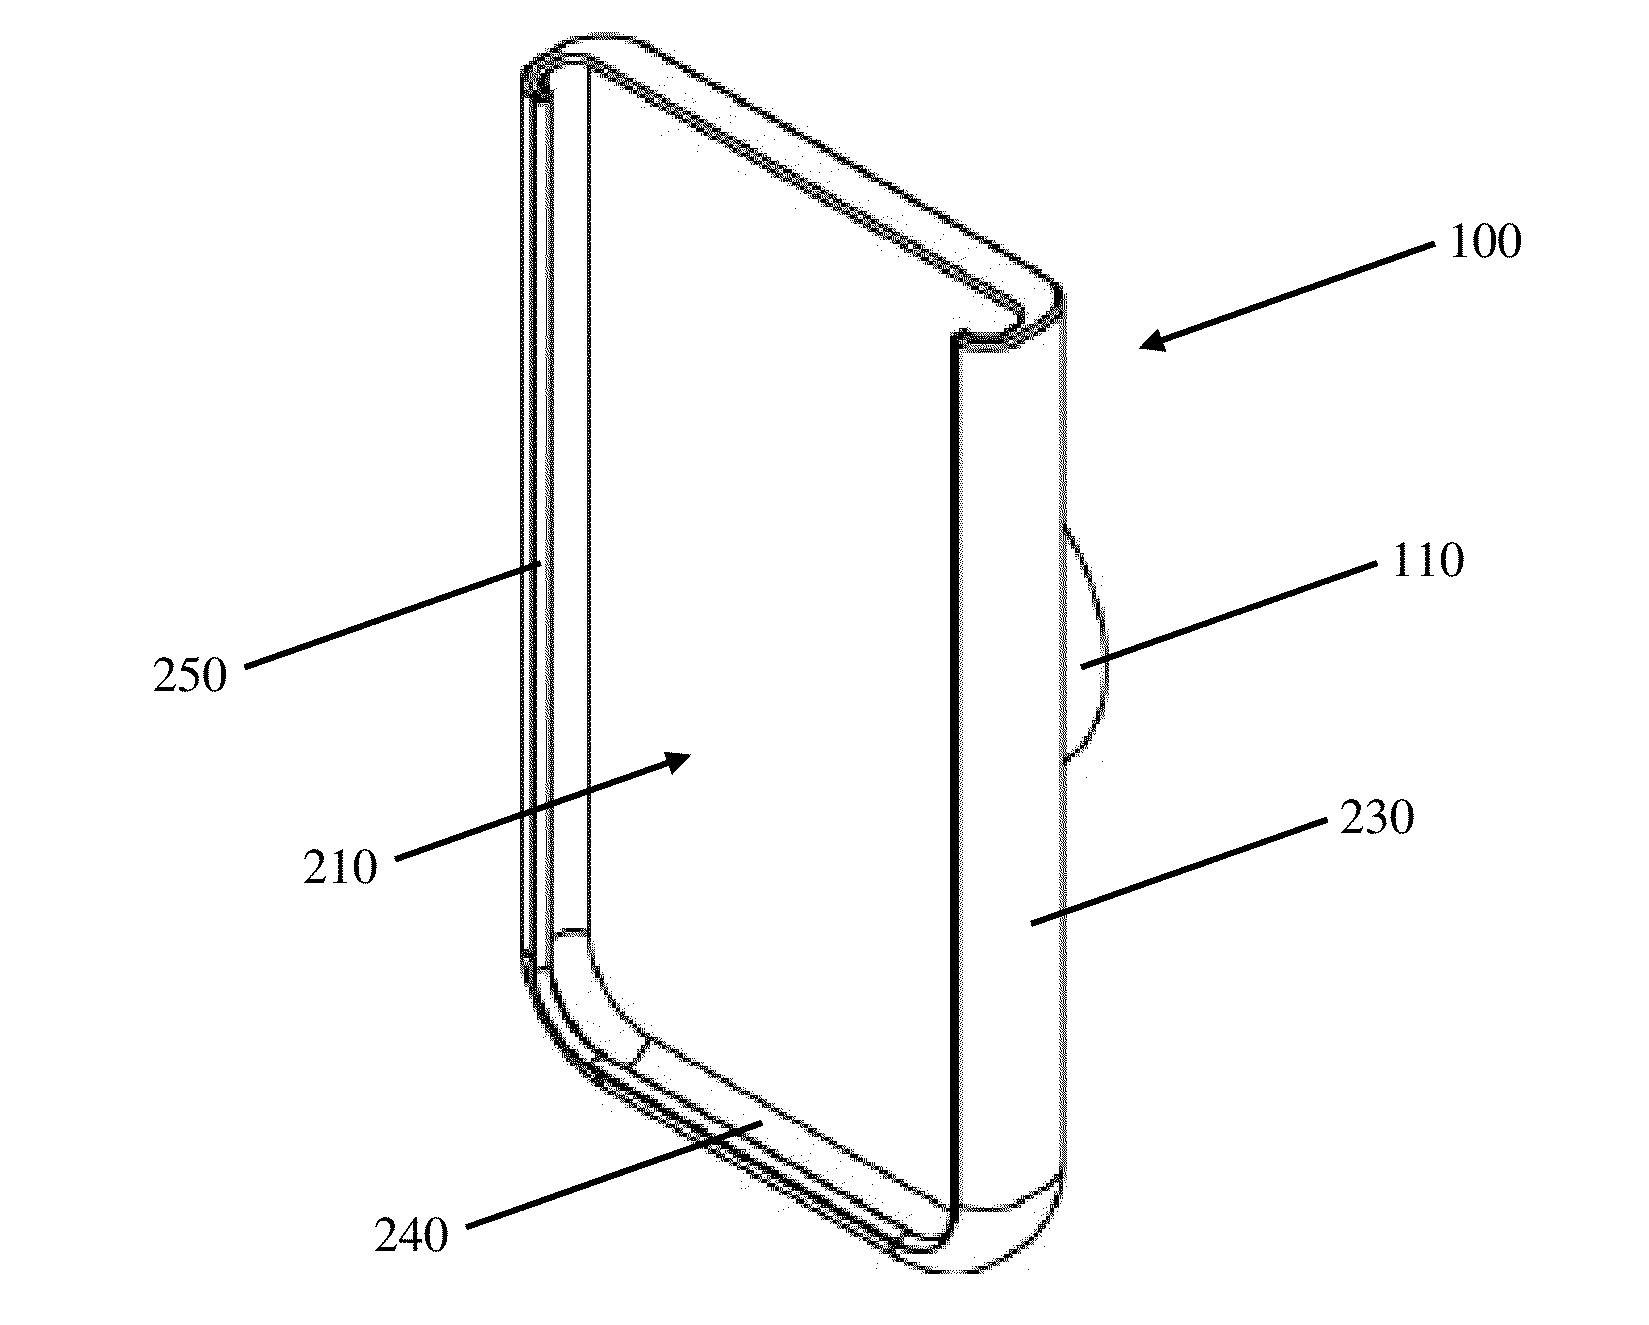 Device, system and methods for assessing tissue structures, pathology, and healing